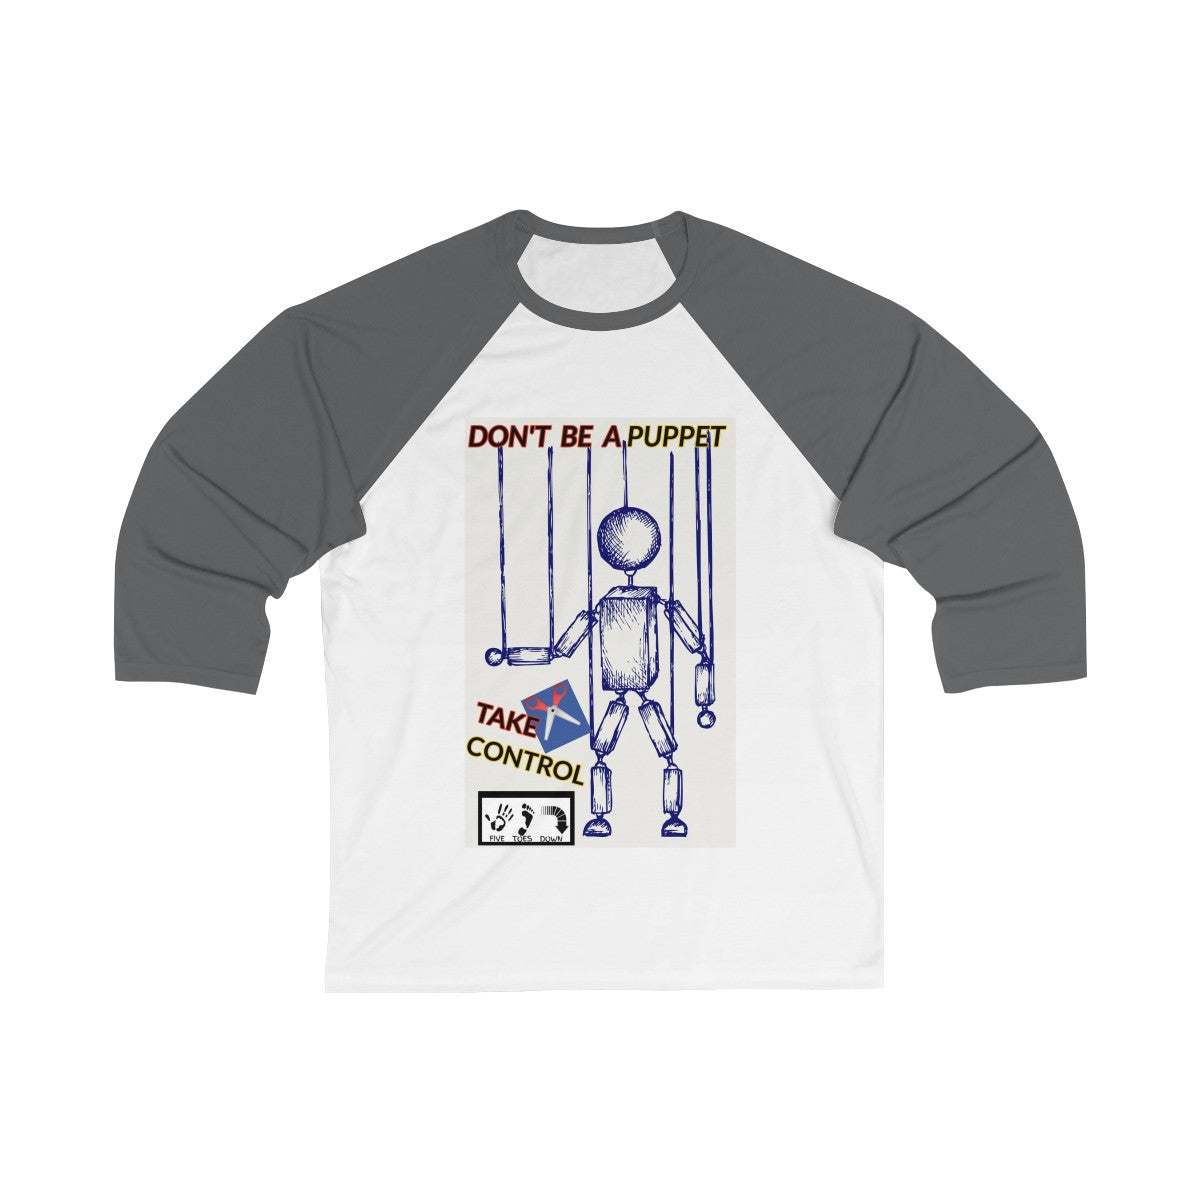 Five Toes Down Puppet Unisex 3/4 Sleeve Baseball Tee